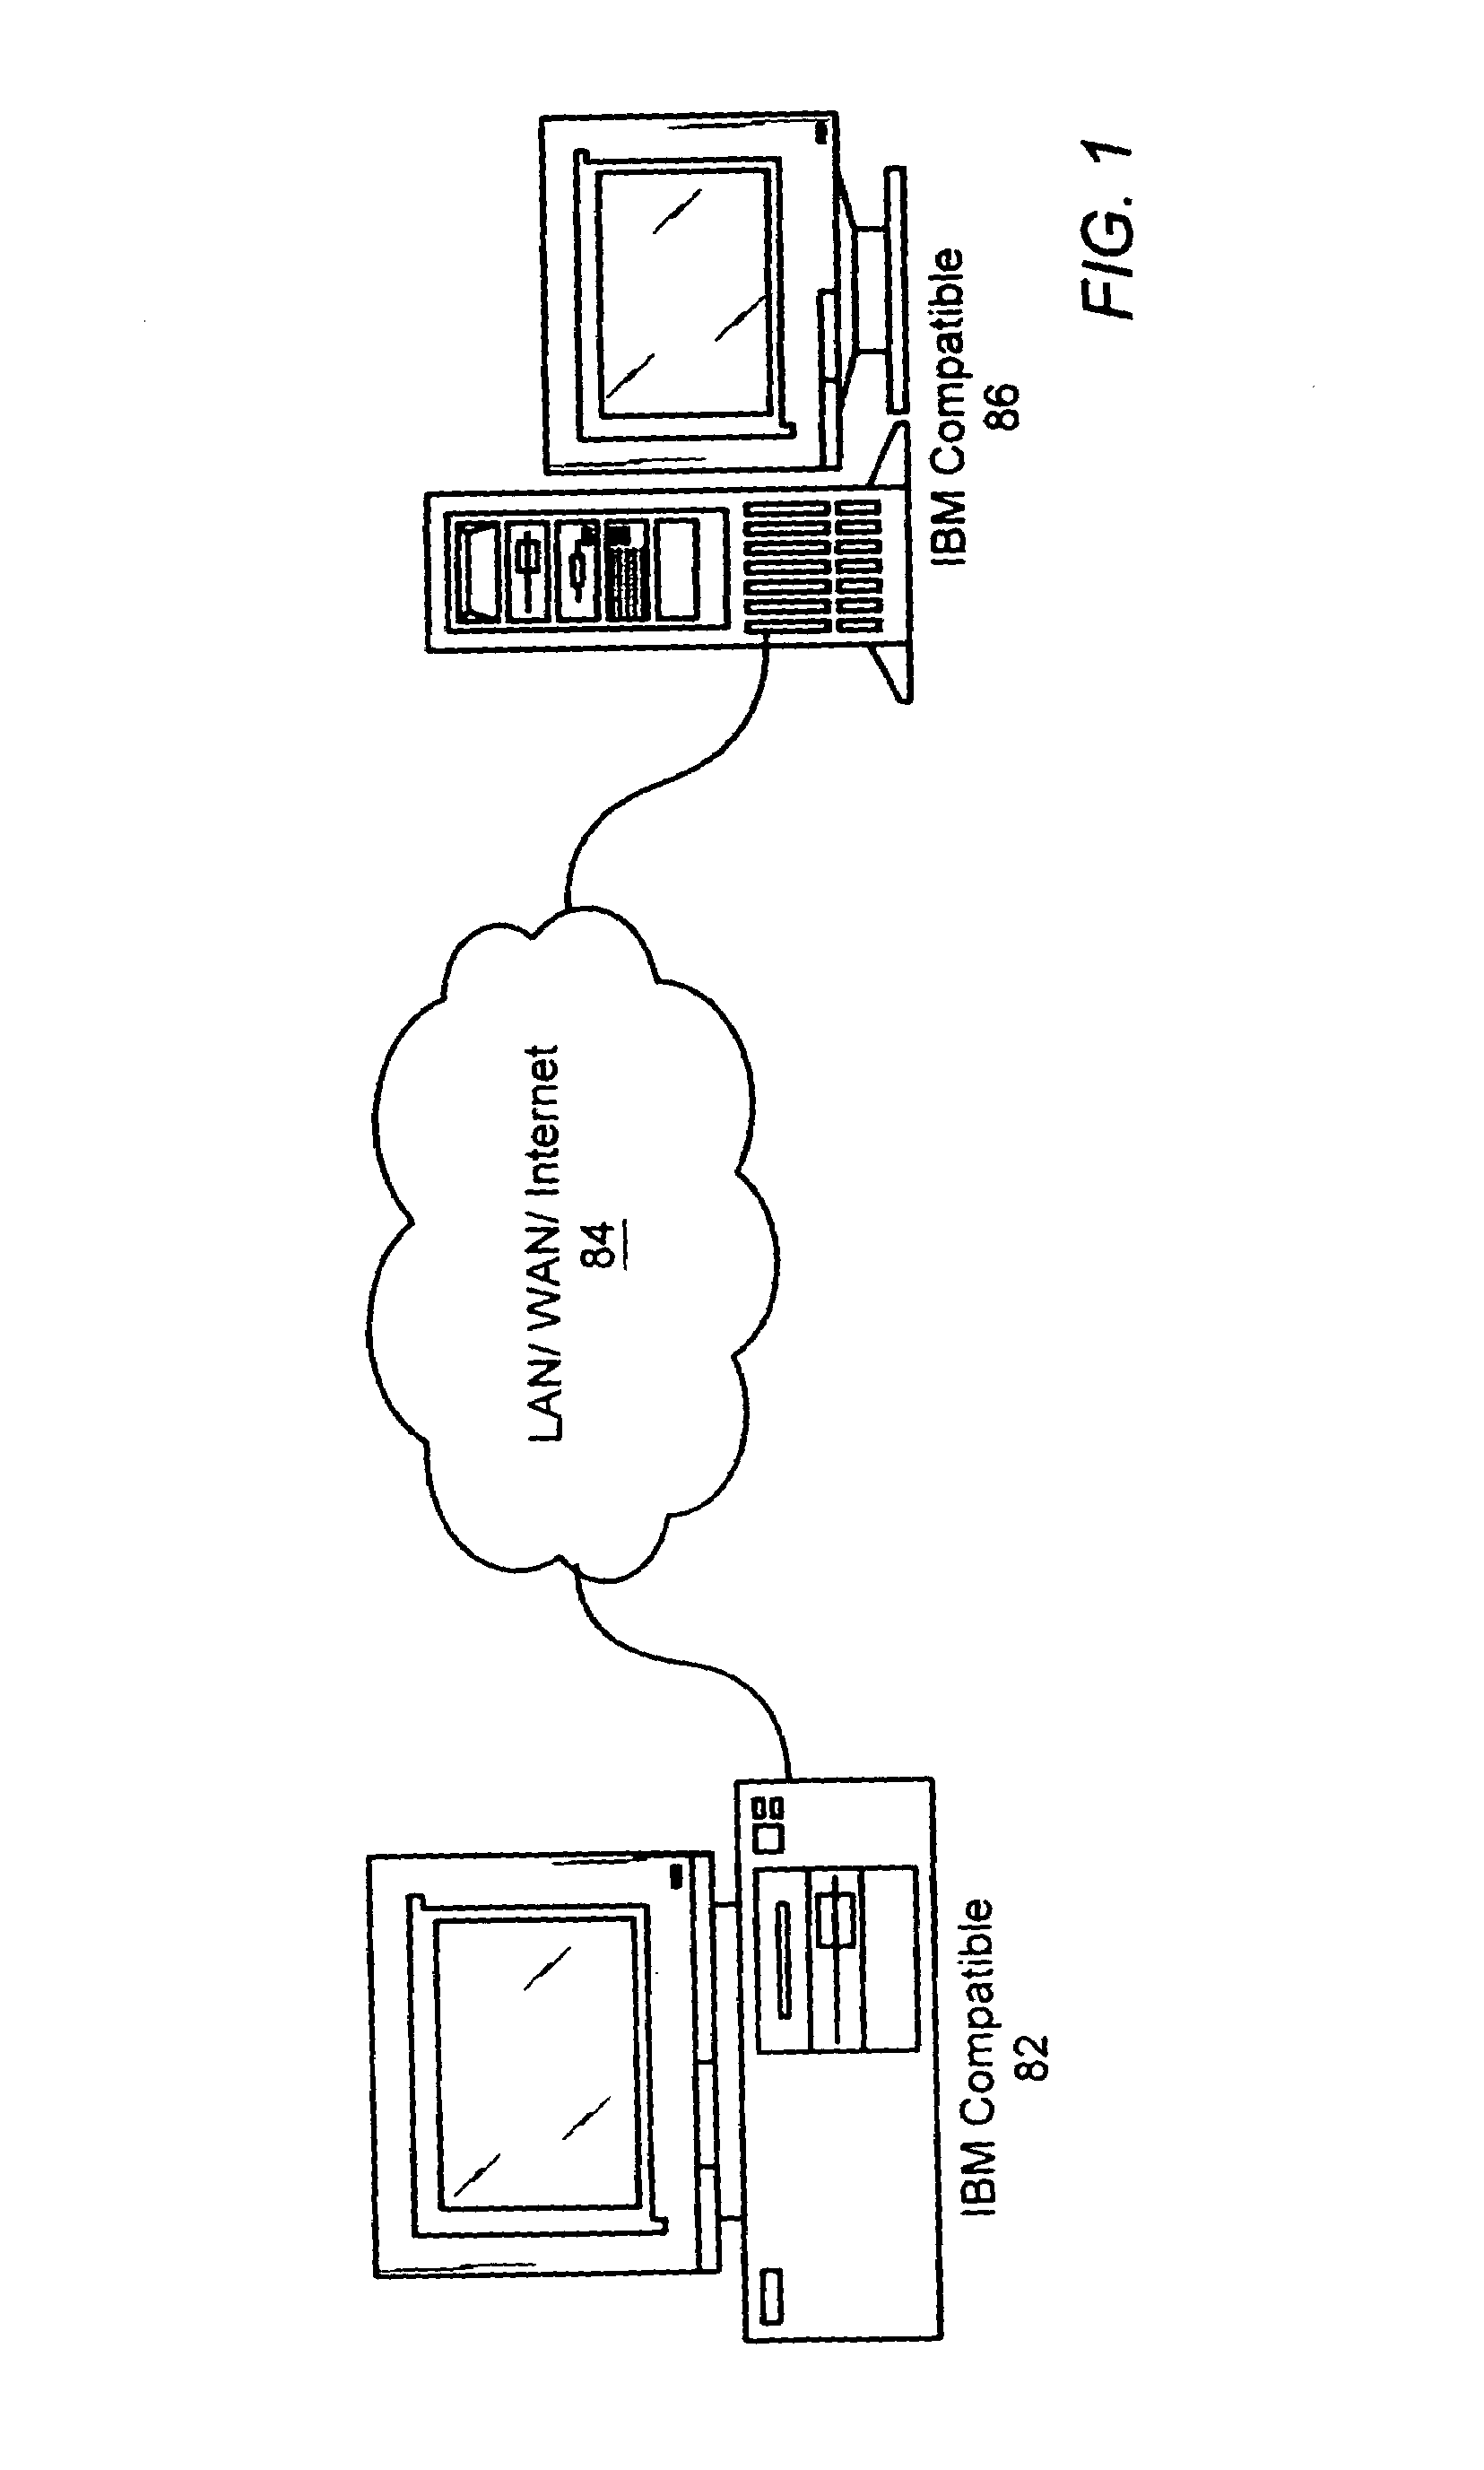 System and method for automatically creating URLs for accessing data sources and data targets